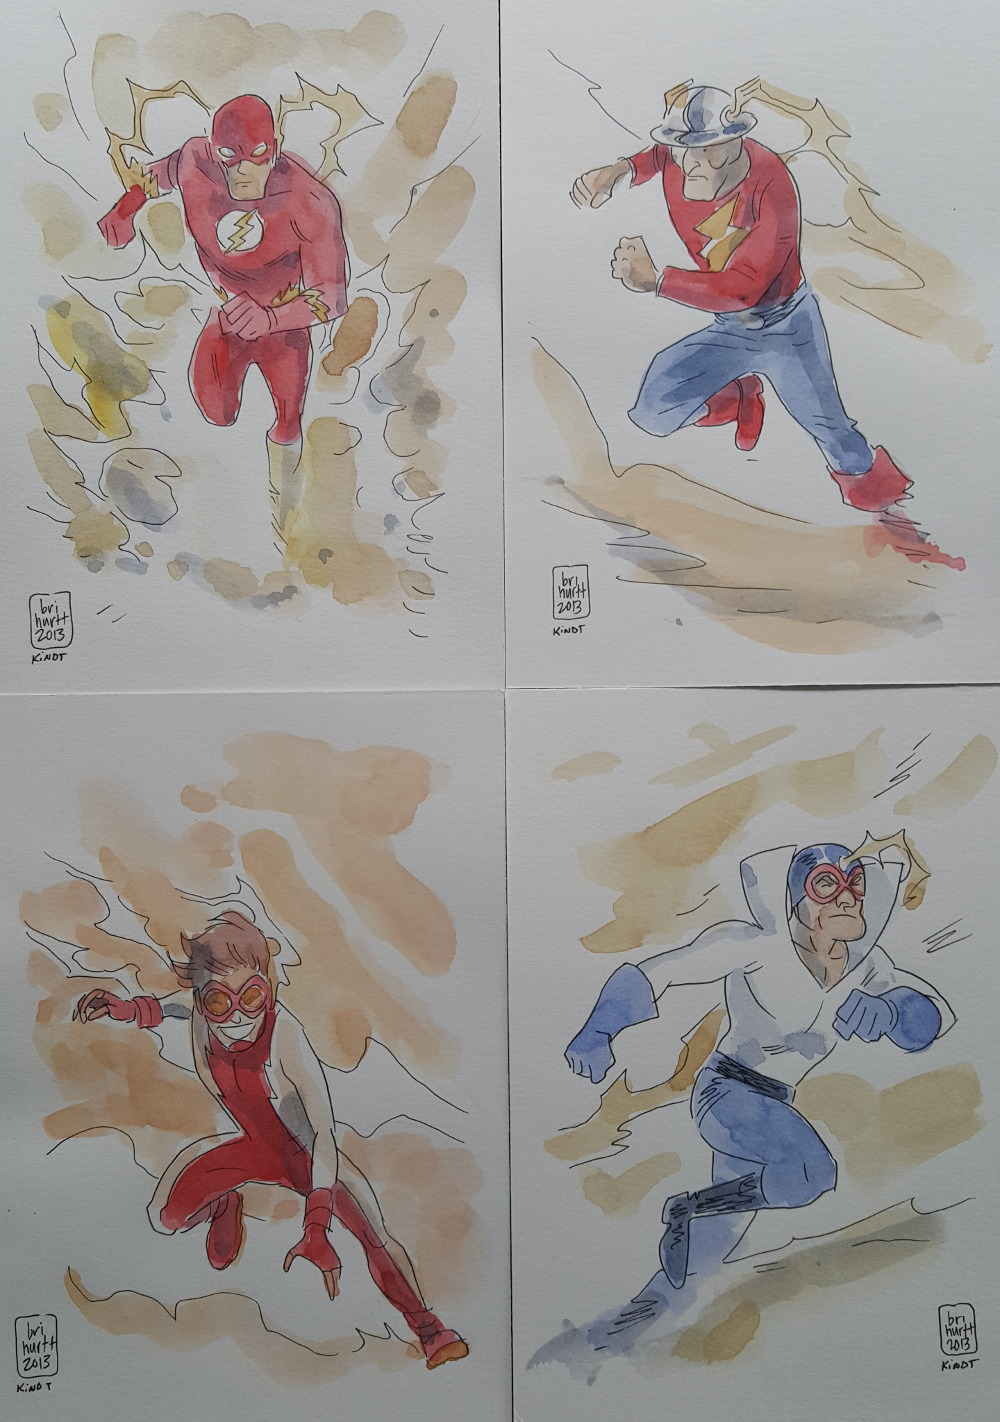 The Flash Family by Brian Hurtt and Matt Kindt